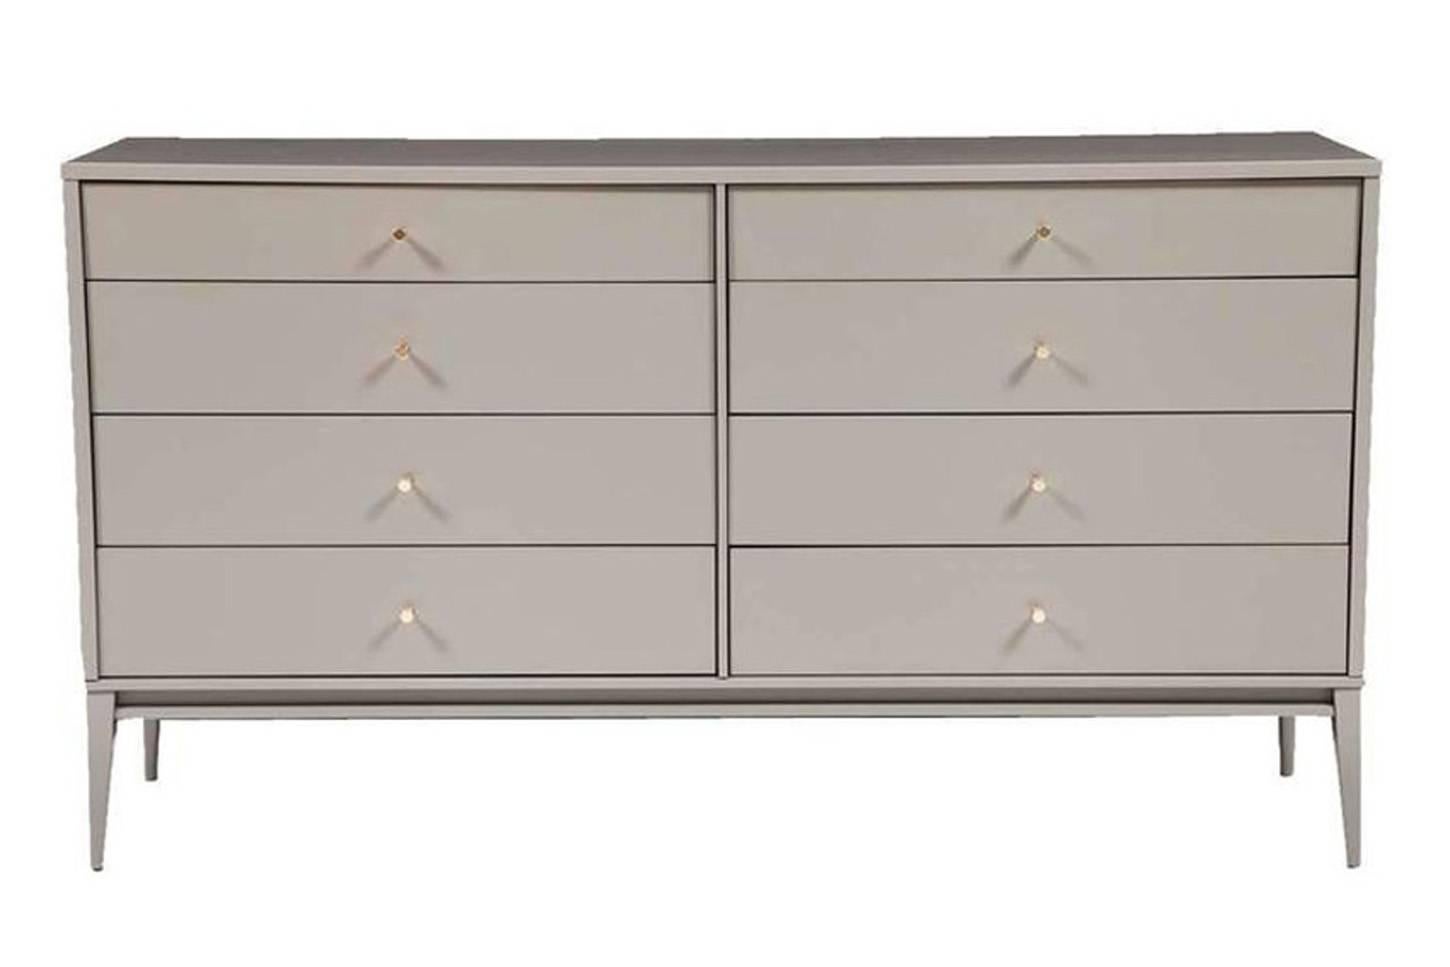 Lacquered eight-drawer dresser on apron frame base detailed with solid brass drawer pulls. Solid maple drawer boxes with under-mount soft close mechanical drawer slides. Custom lacquer and wood finishes available.

Custom orders have a lead time